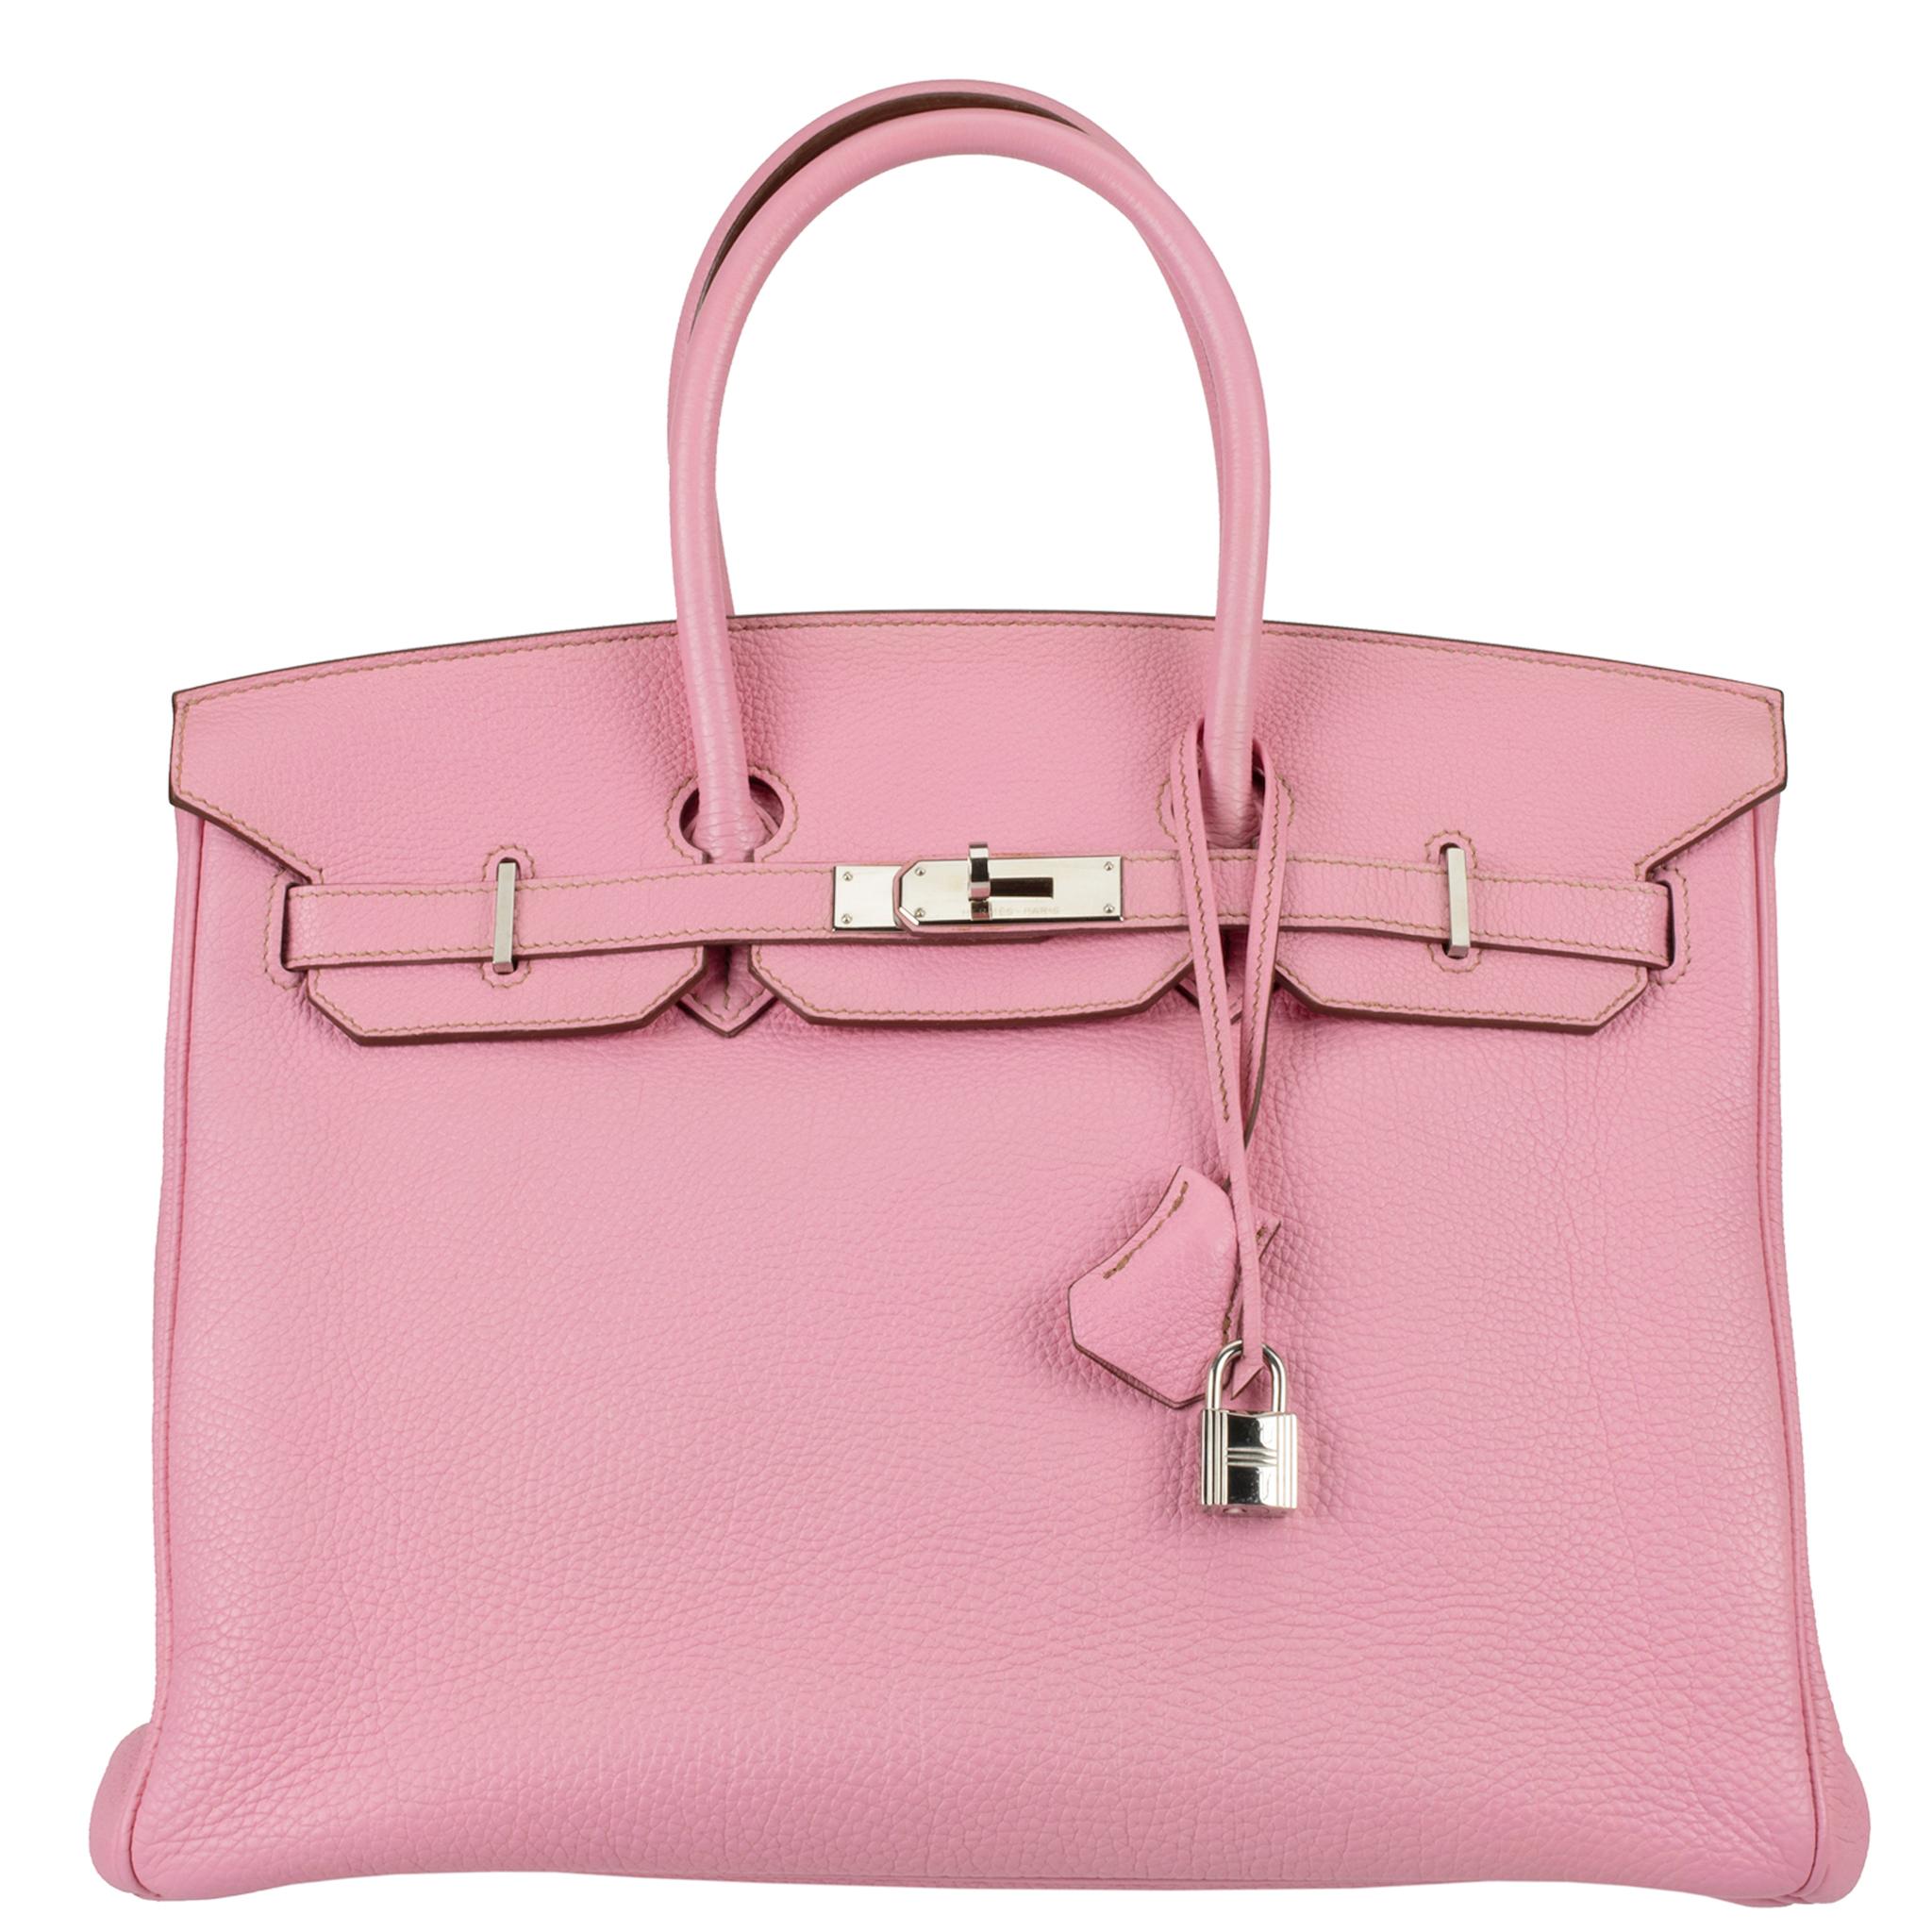 Brand: Hermès 
Style: Birkin Retourne
Size: 35cm
Color: Bubblegum
Leather: Togo Leather
Hardware: Palladium
Year: 2012 P

Condition: Preloved Excellent: 
Age is consistent with general wear, handbag retains structure, and the leather shows minimal